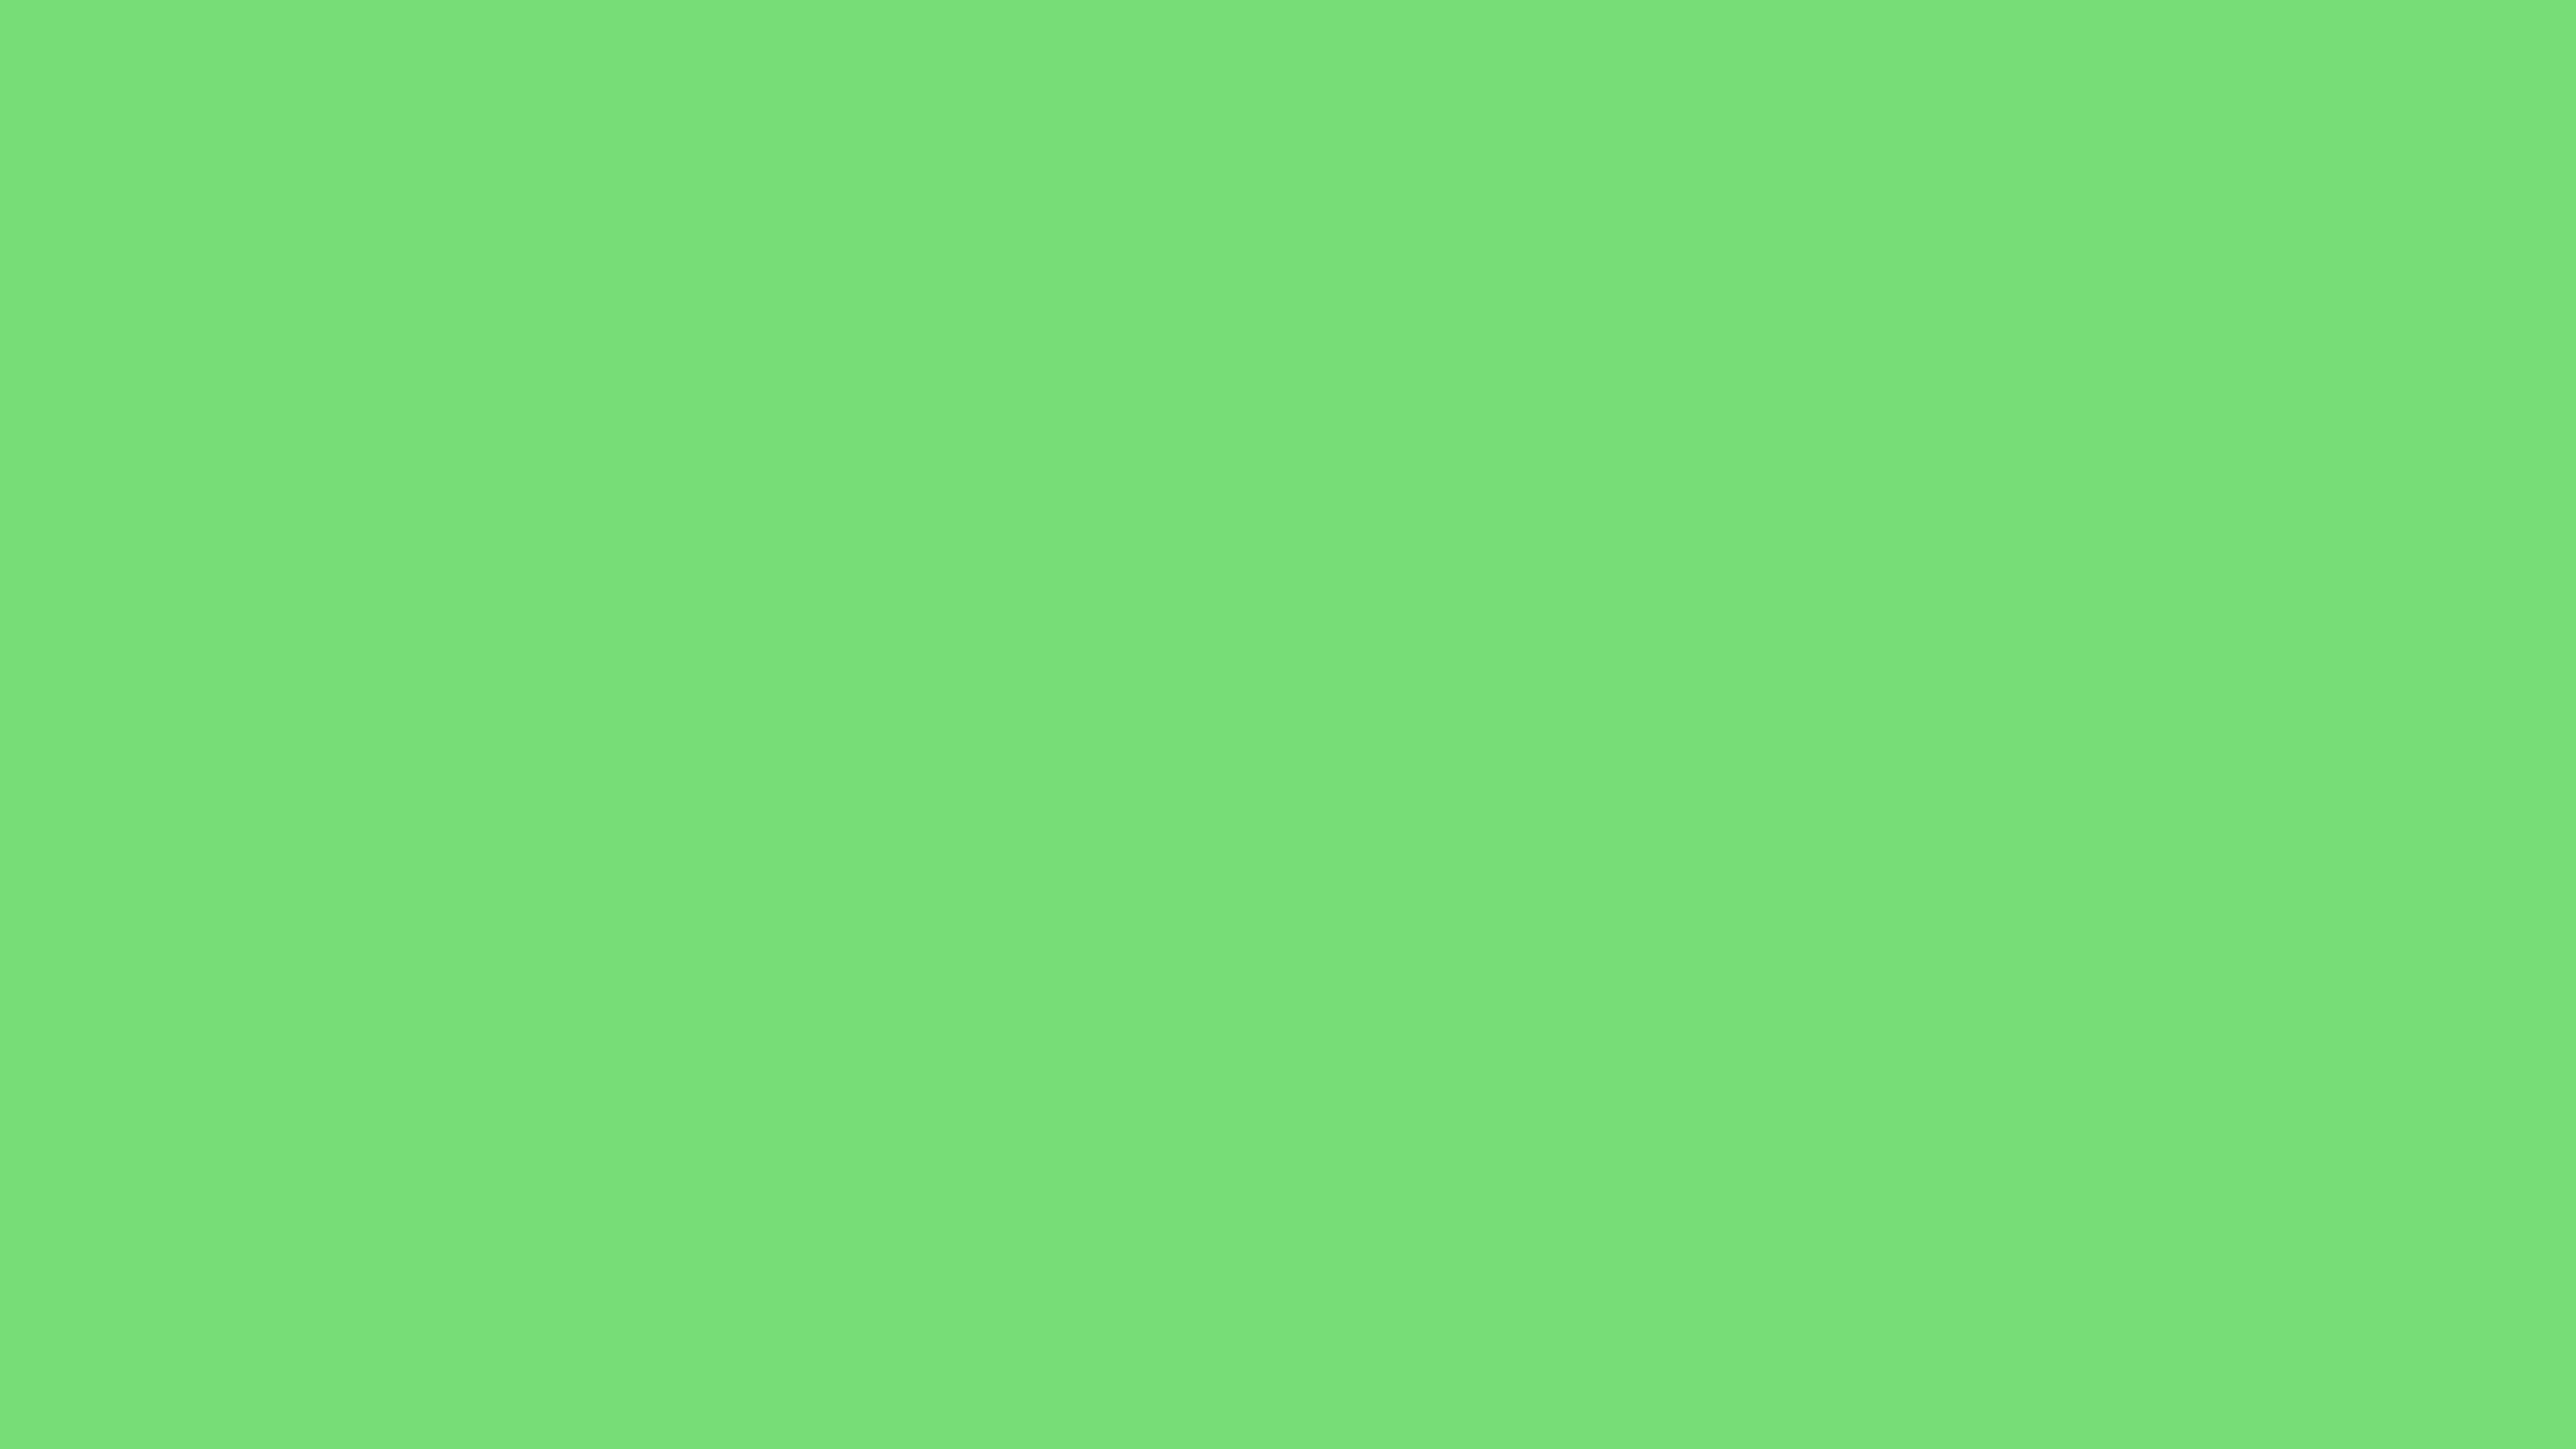 4096x2304 Pastel Green Solid Color Background